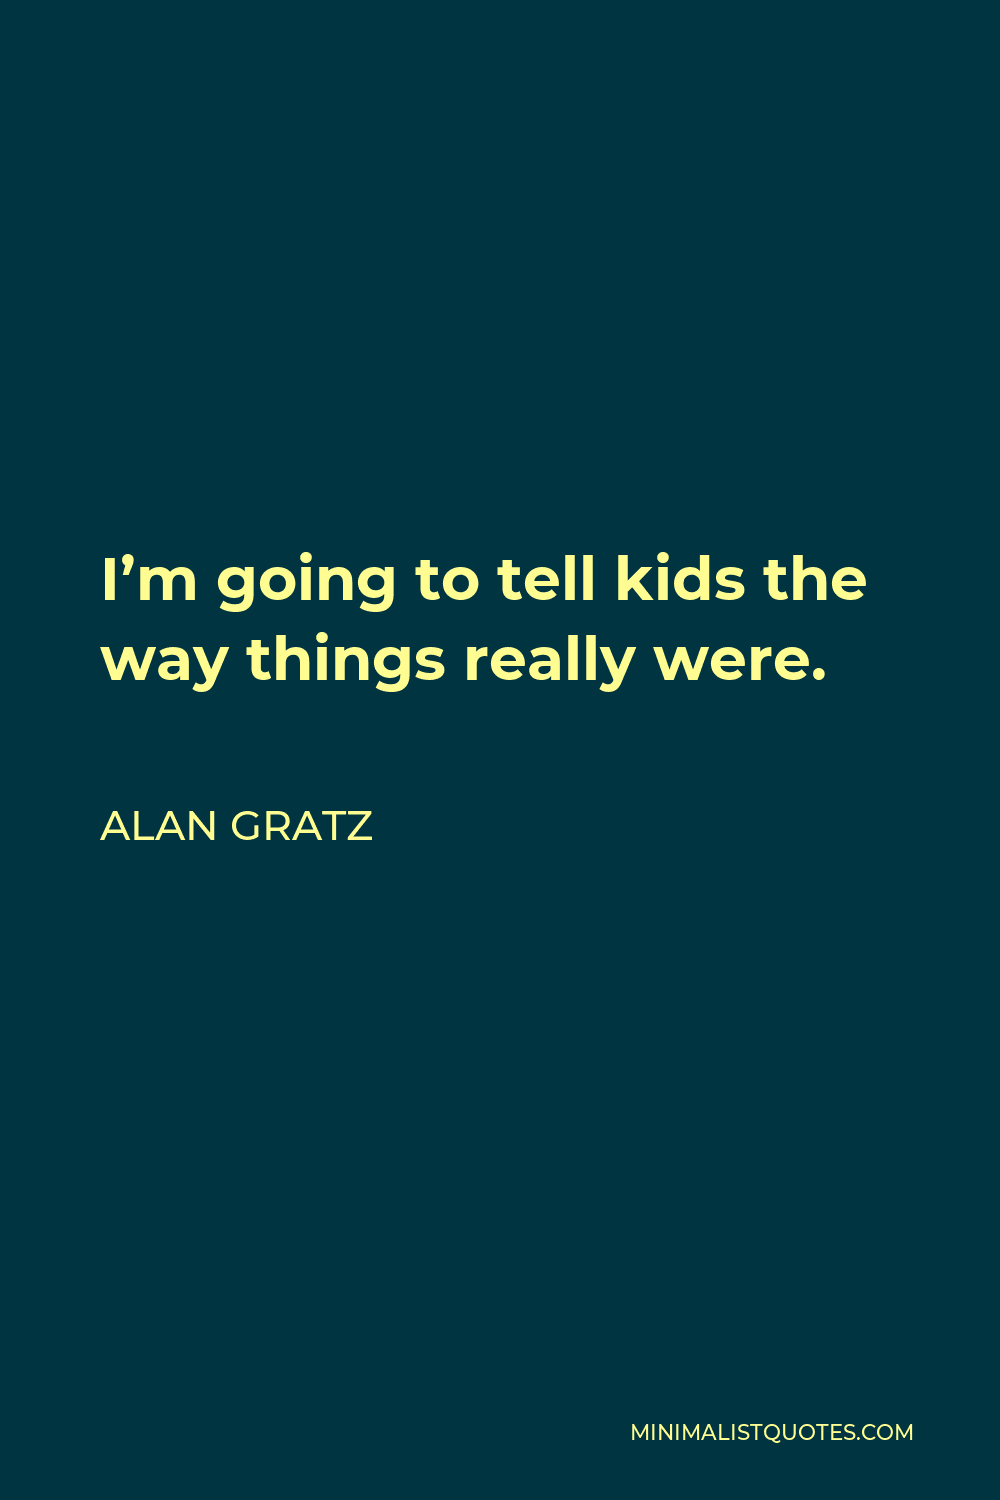 Alan Gratz Quote - I’m going to tell kids the way things really were.